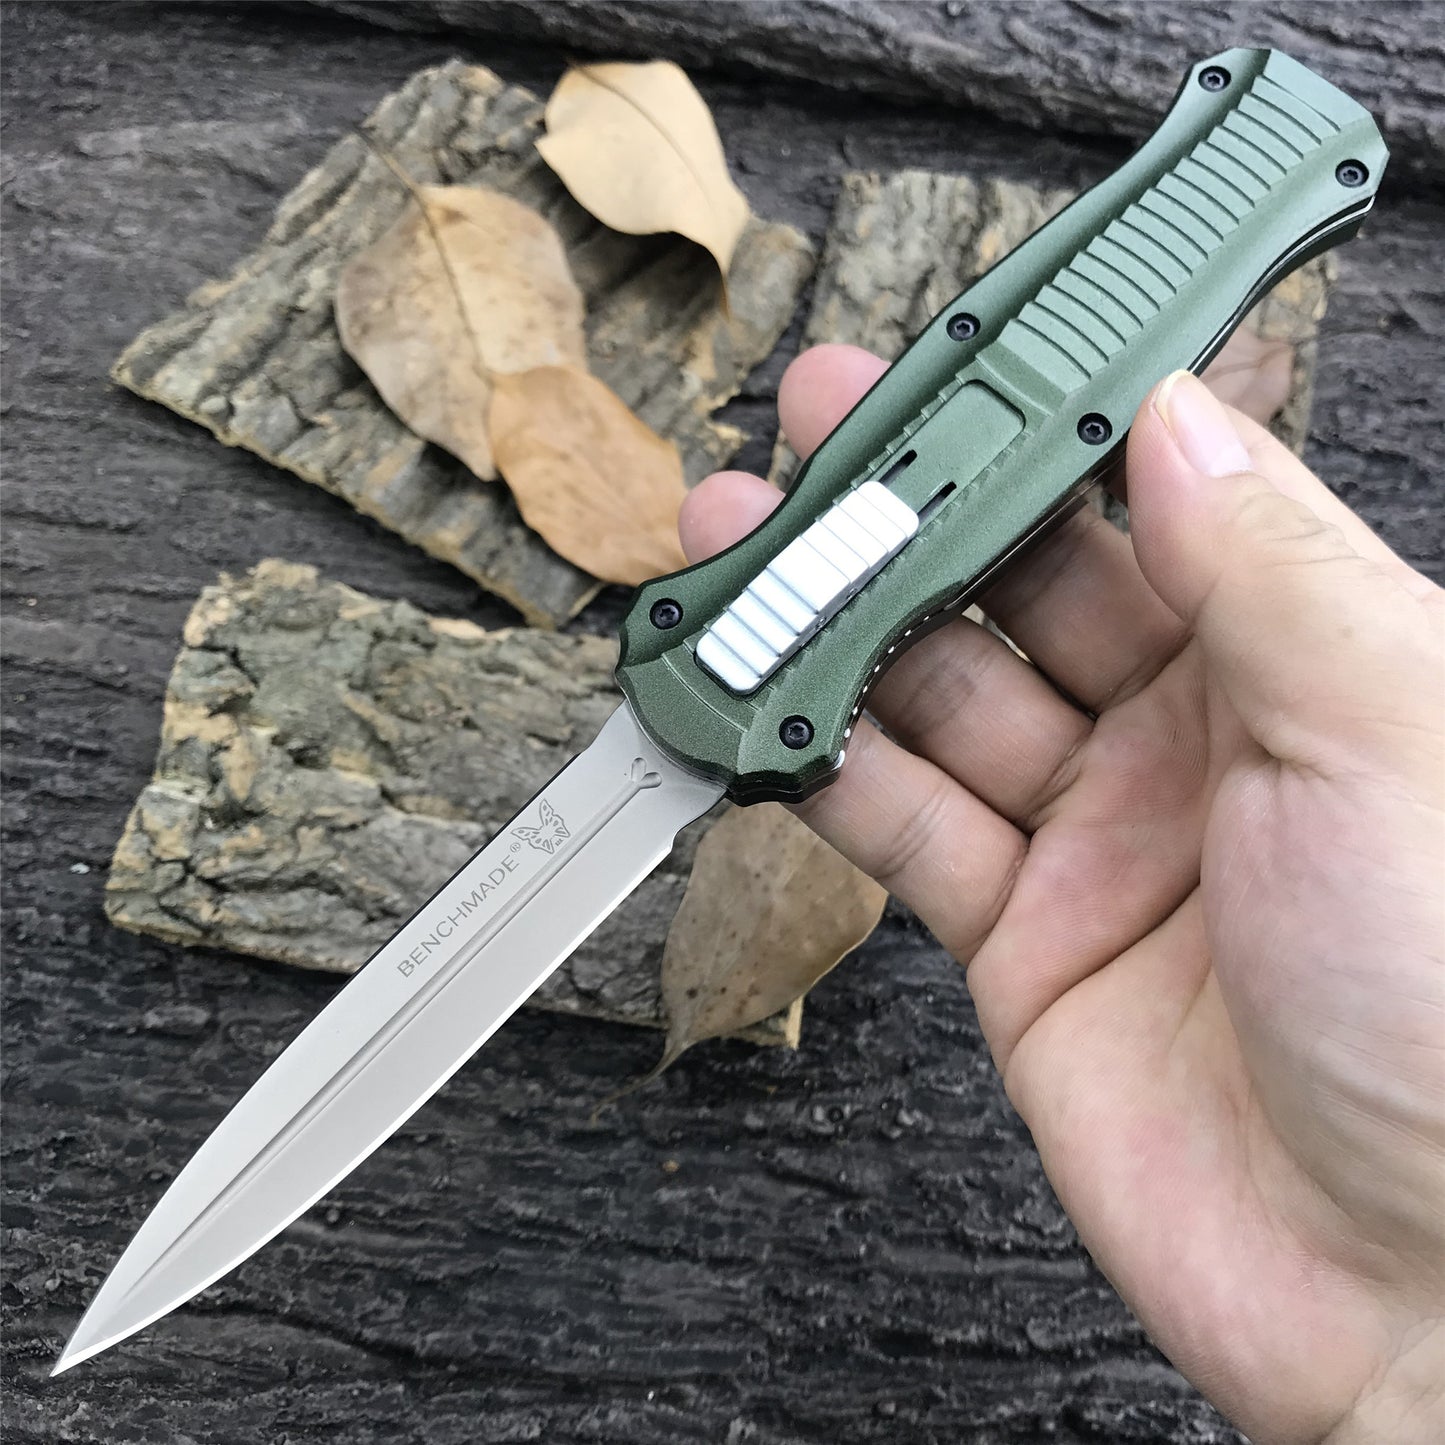 Benchmade 3300bk dagger Tactical Knives AUTO EDC Spring Assist Knife Fixed Blades Double Edge Survival Knifes Camping Hunting Cutting Knifes Fast Opening